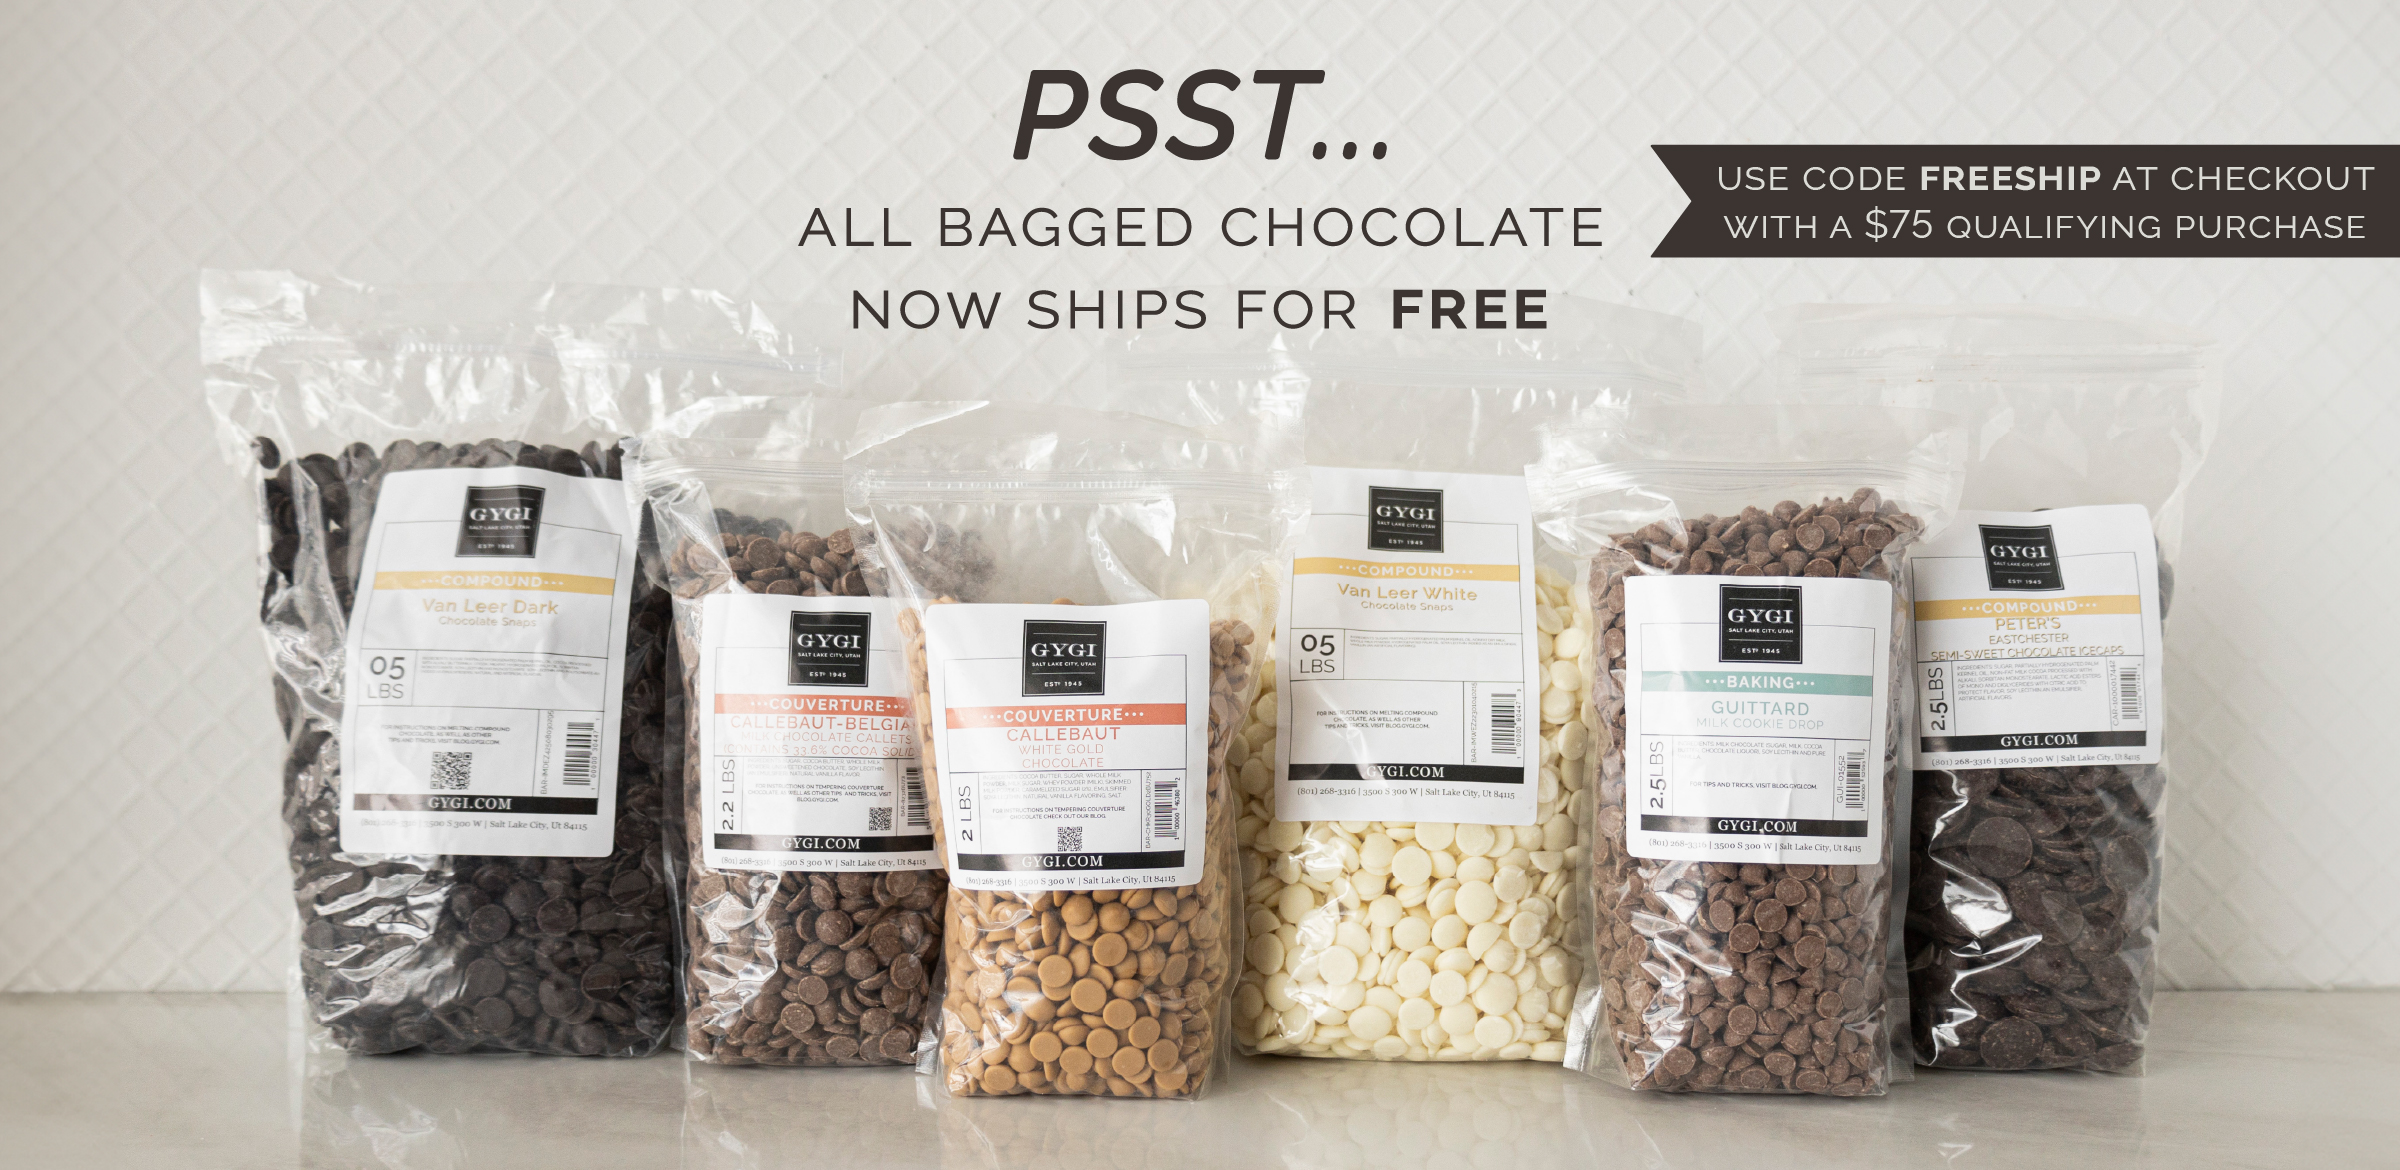 psst...all bagged chocolate now ships for free. Enter code FREEESHIP at checkout with a $75 qualifying purchase.